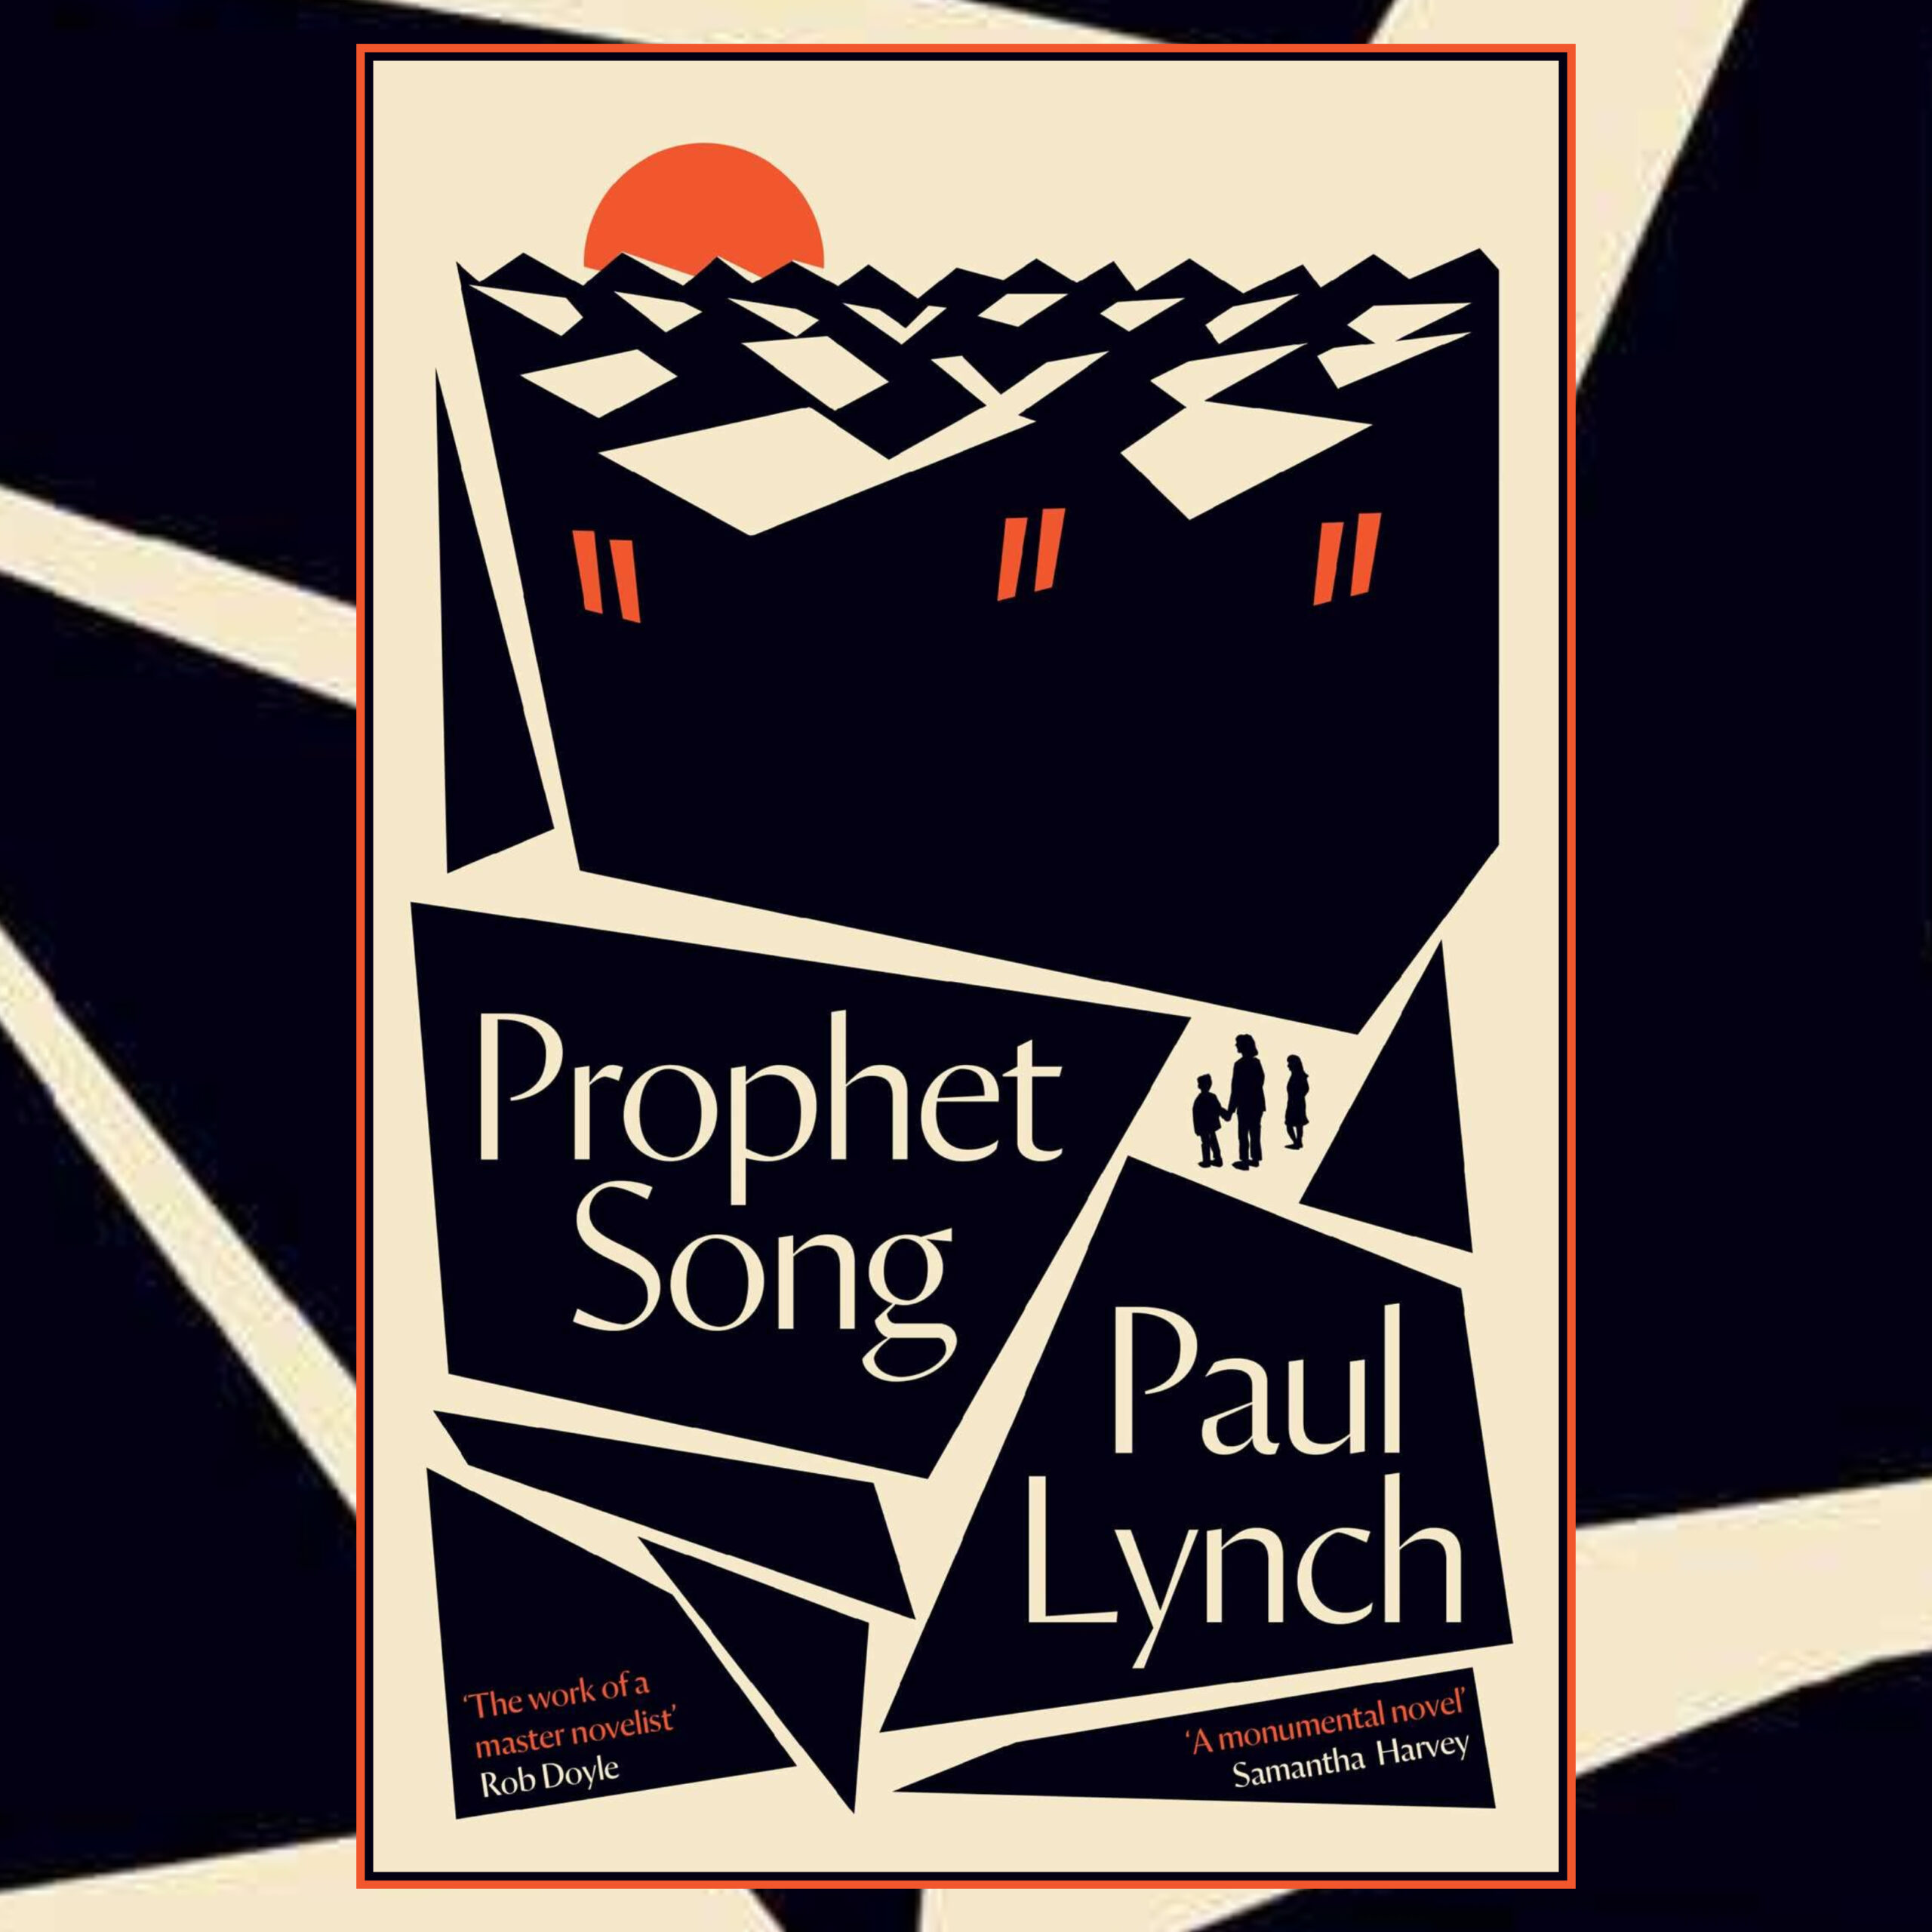 The Book Show | Paul Lynch - Prophet Song